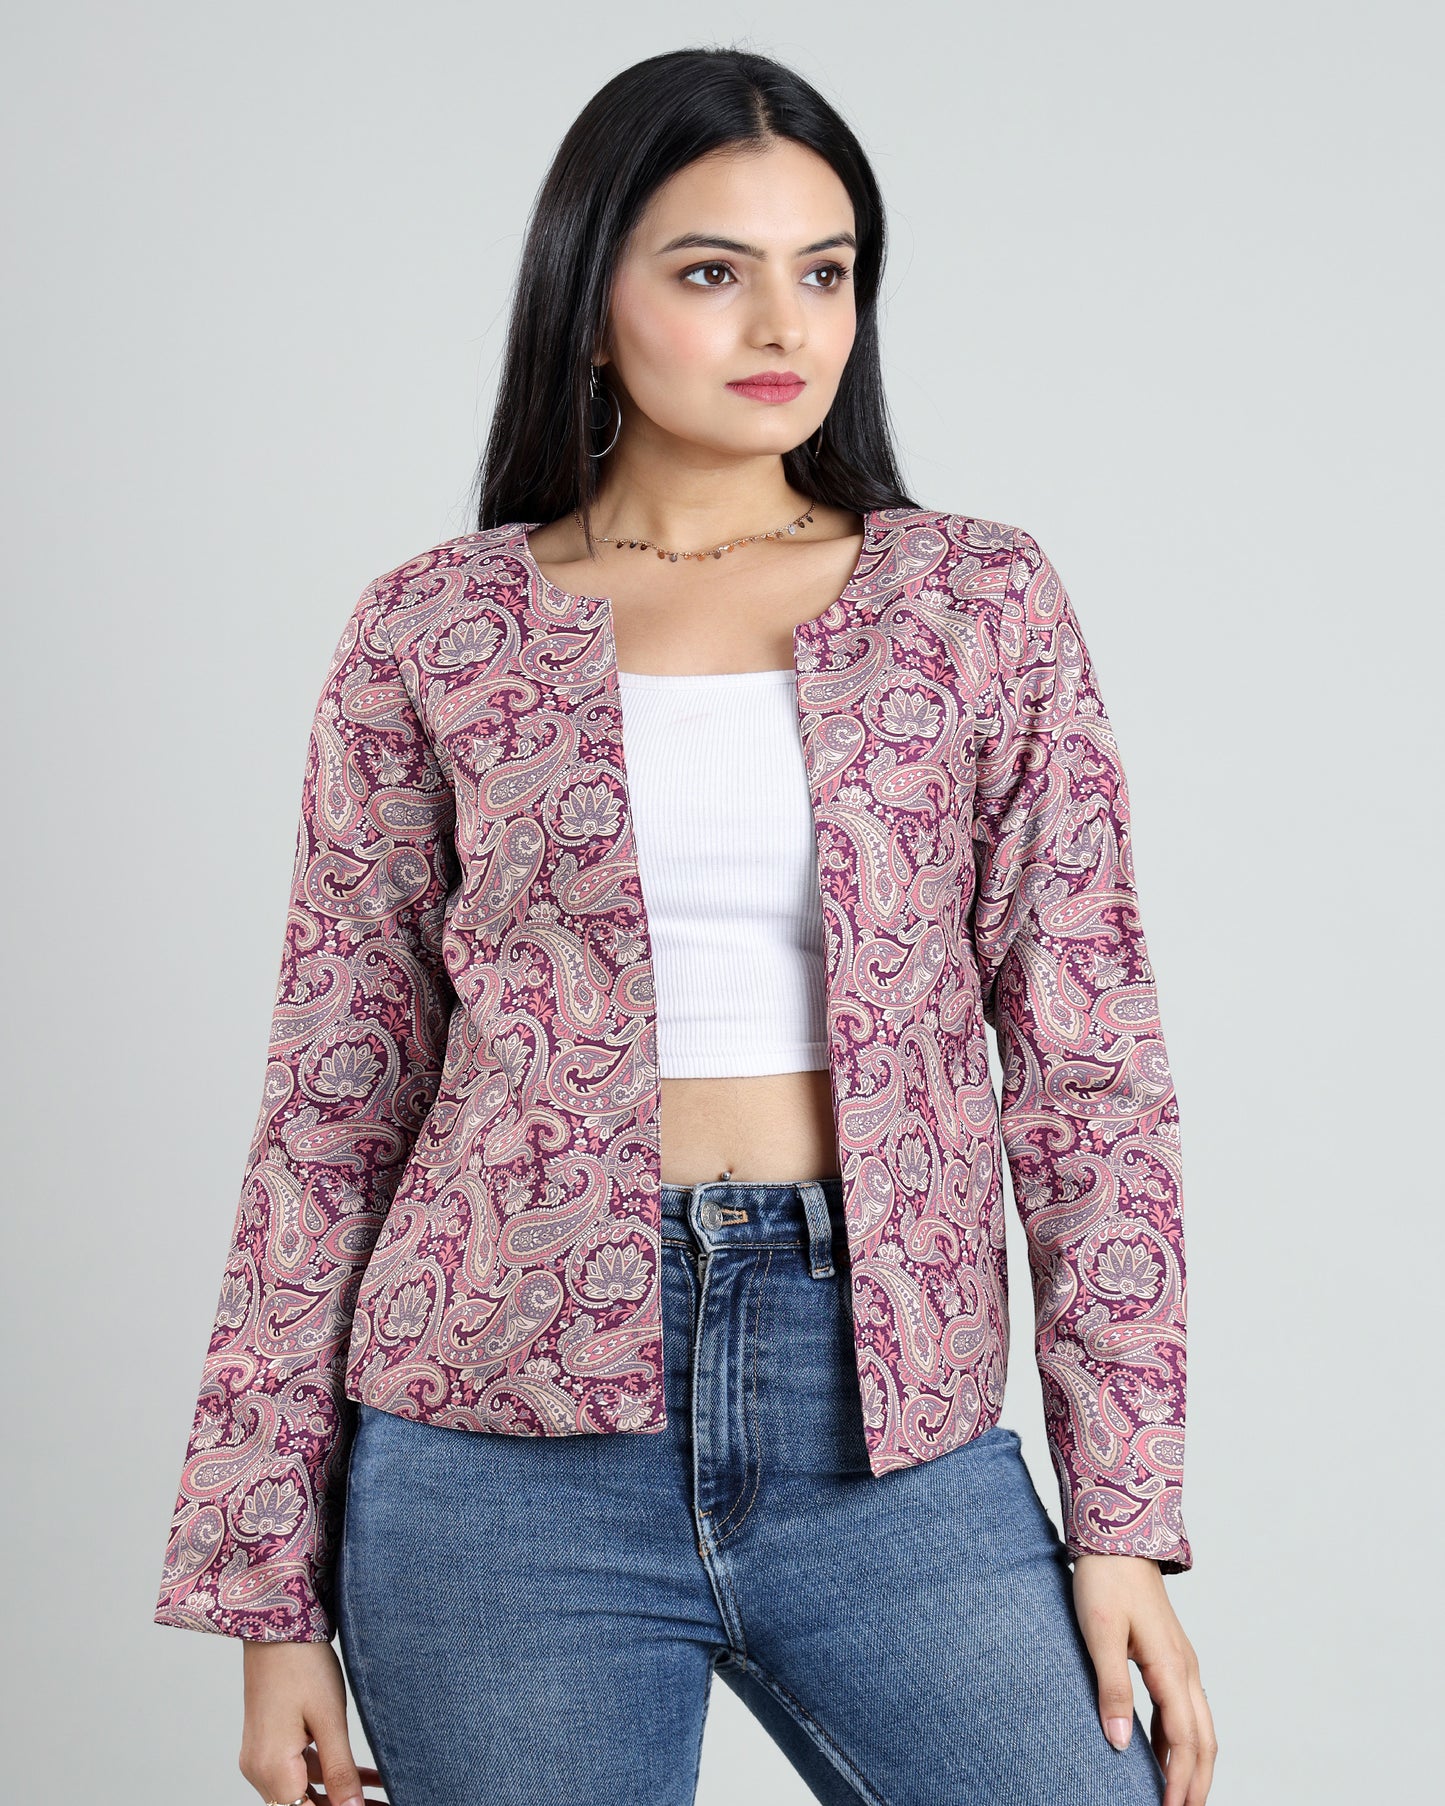 Revamp Your Style The Reversible Women's Jacket